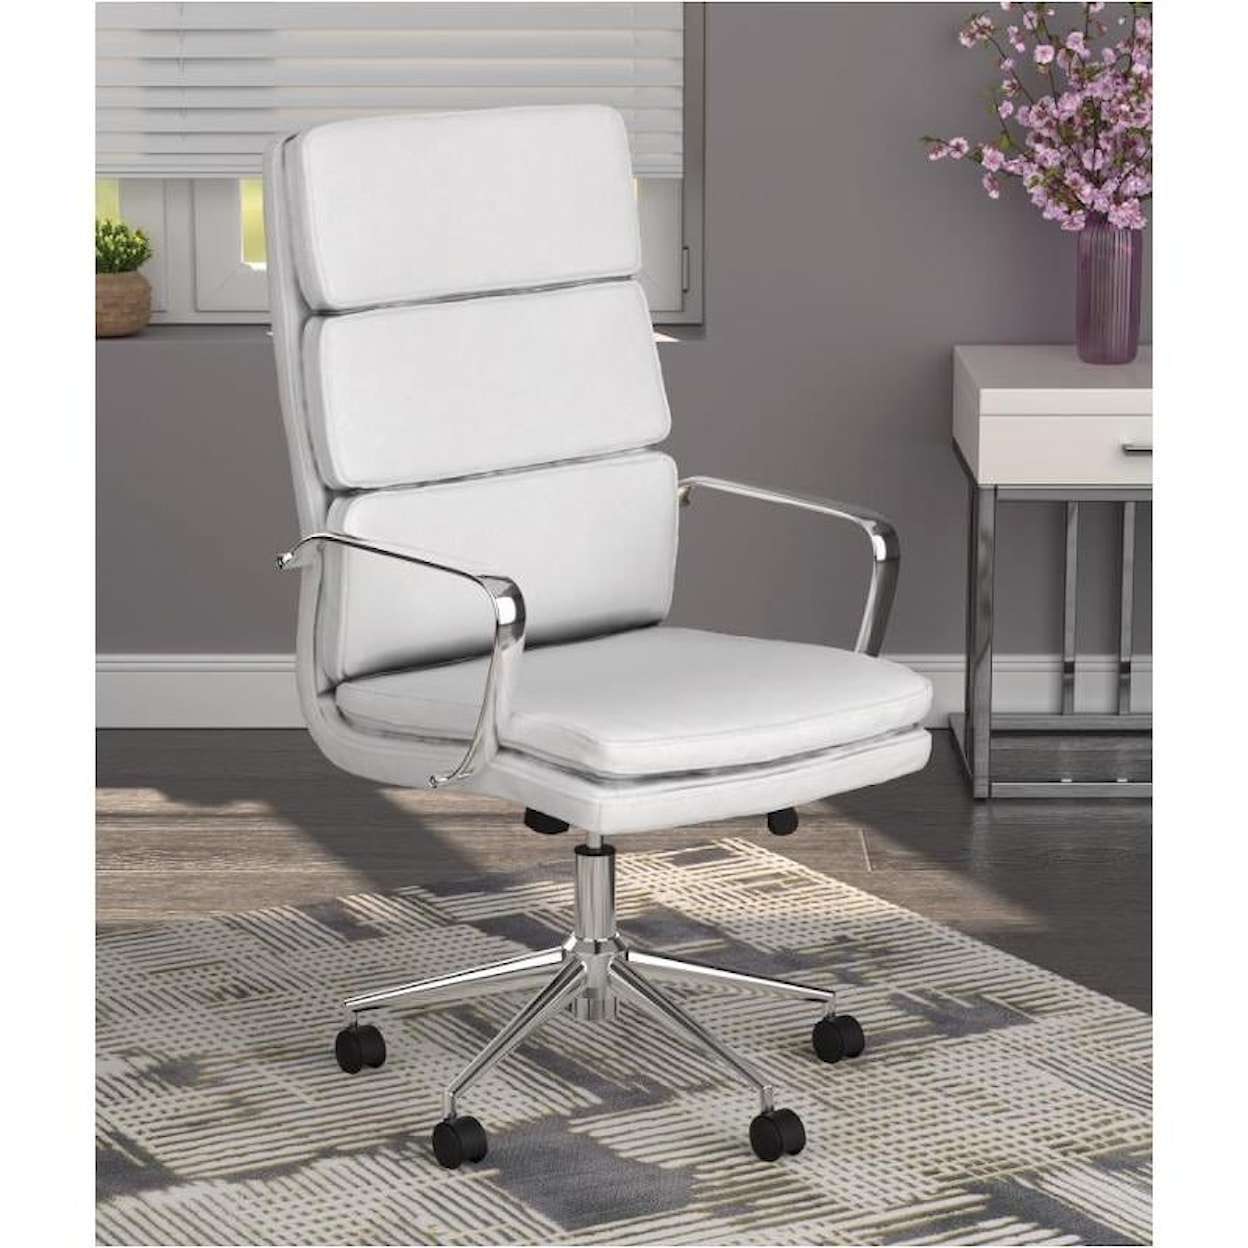 Coaster Francis Office Chair FRANCIS WHITE OFFICE CHAIR |